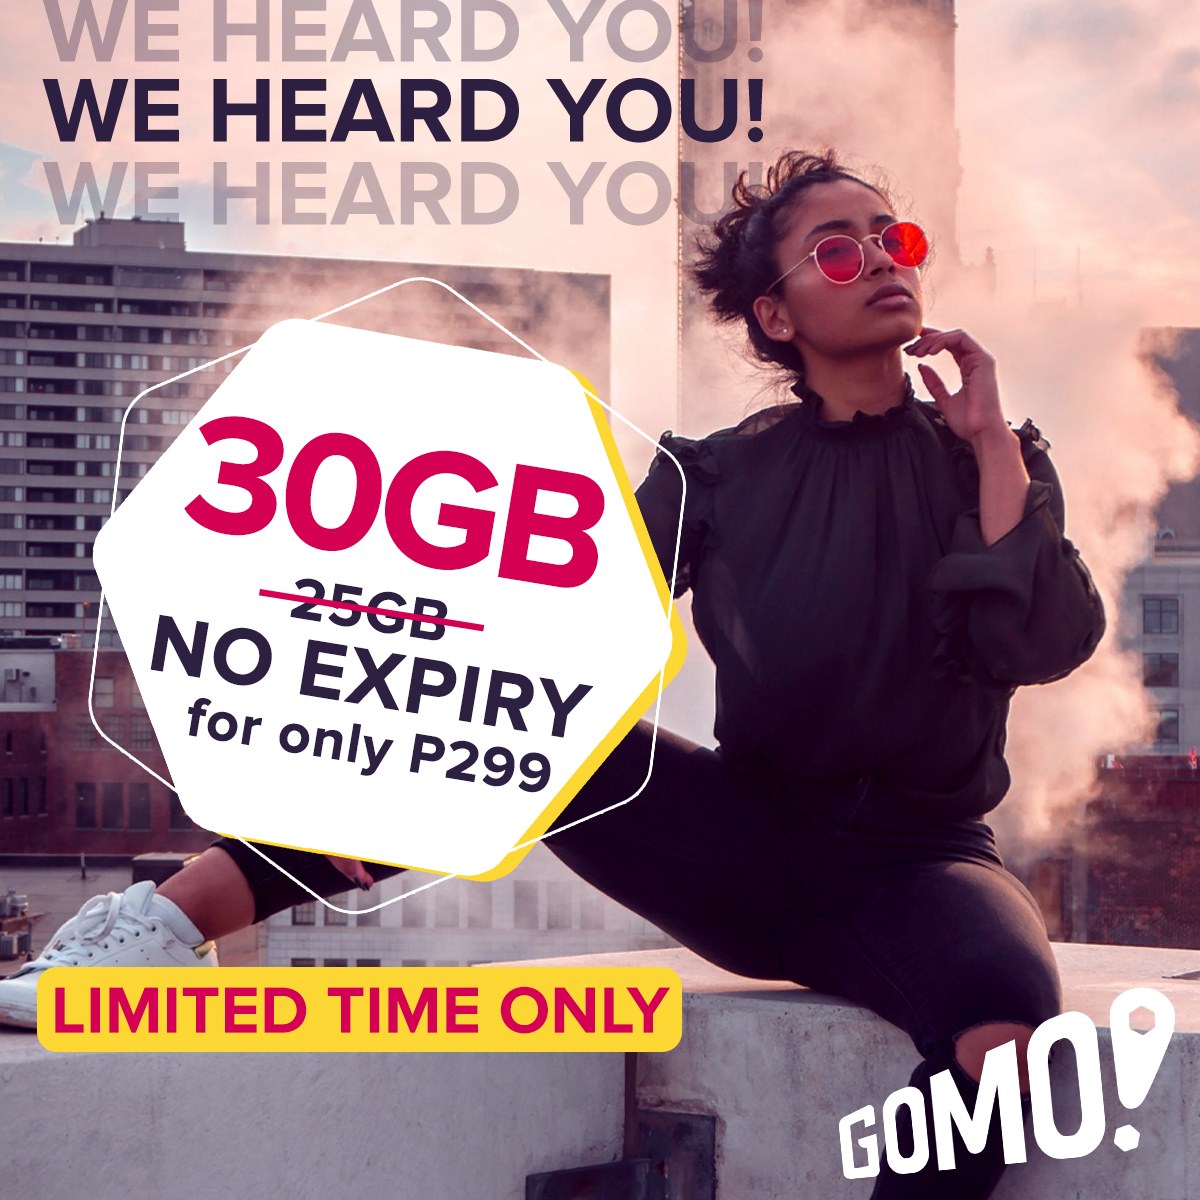 GOMO makes data more awesome with new limited time offer